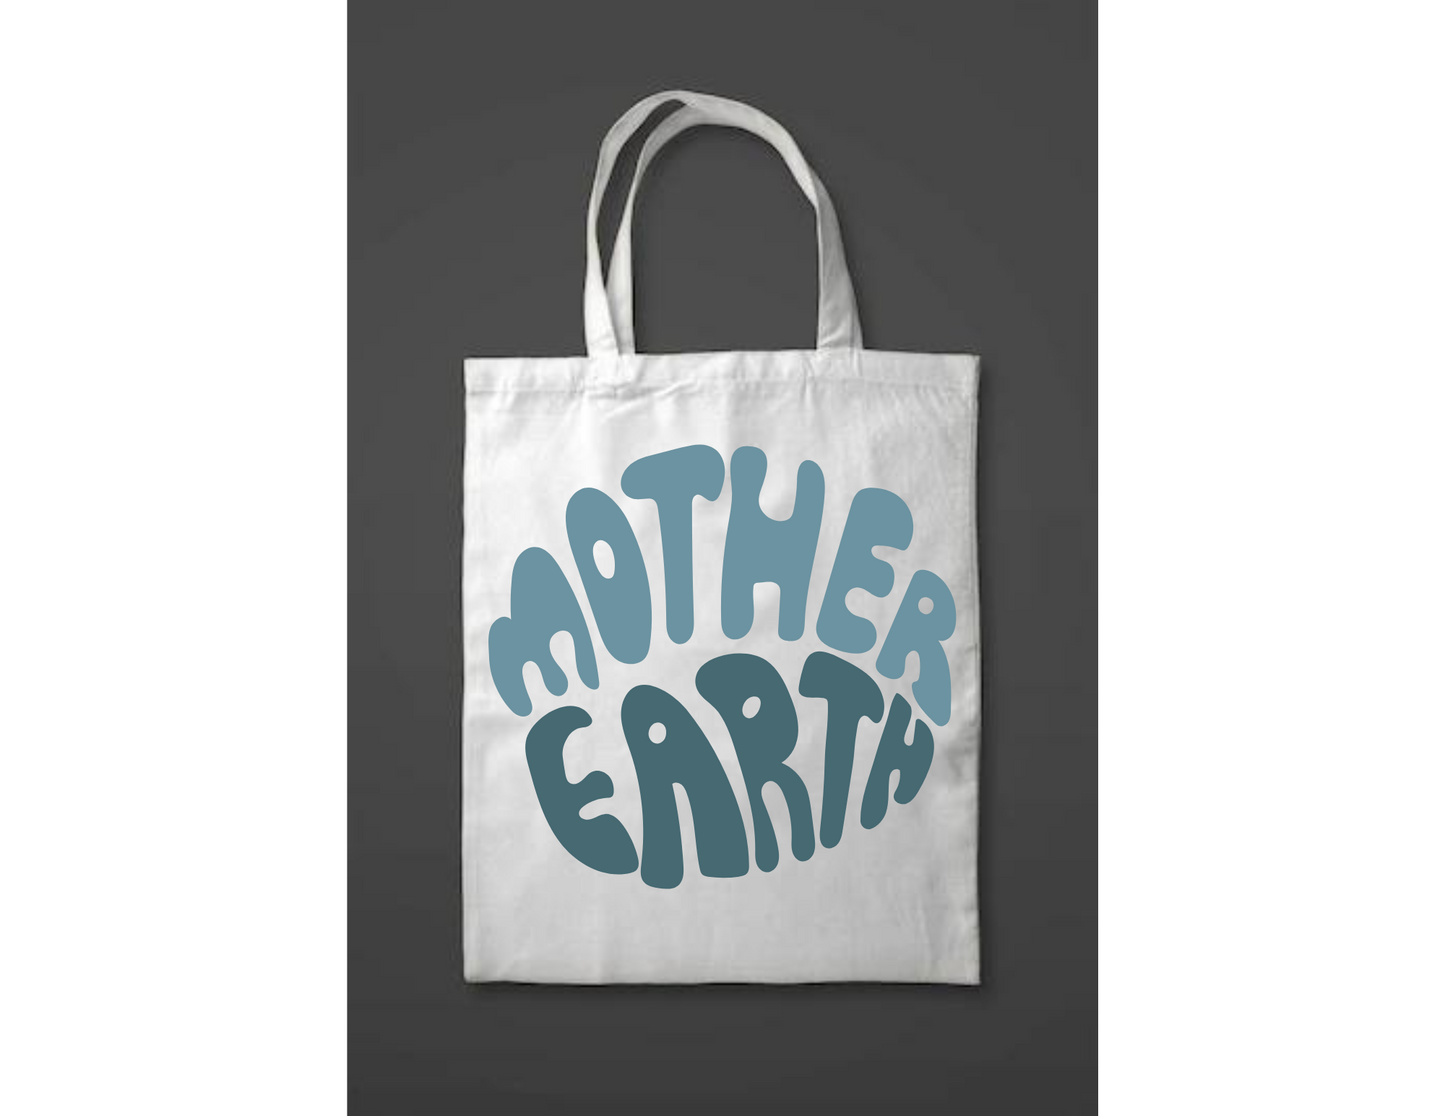 Mother earth tote bag